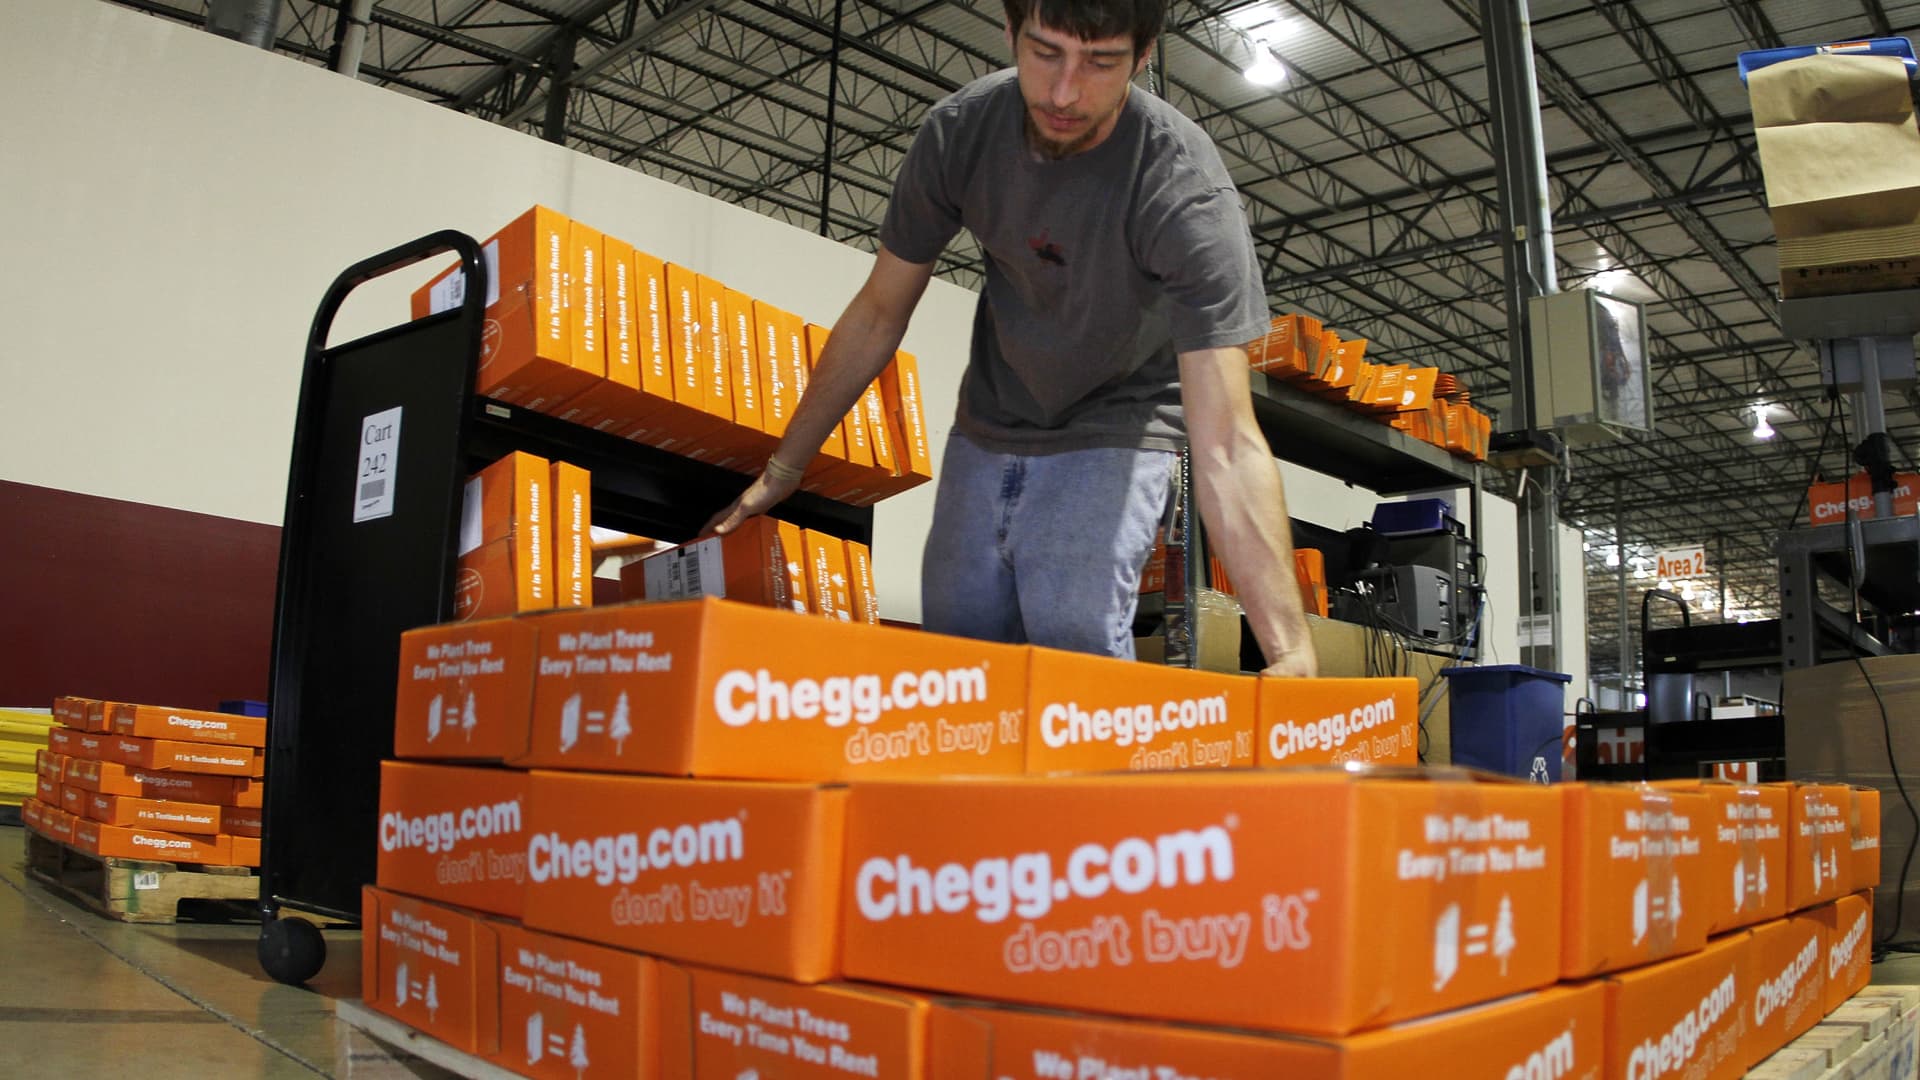 Stocks making the biggest moves midday: Chegg, Expedia, BP and more